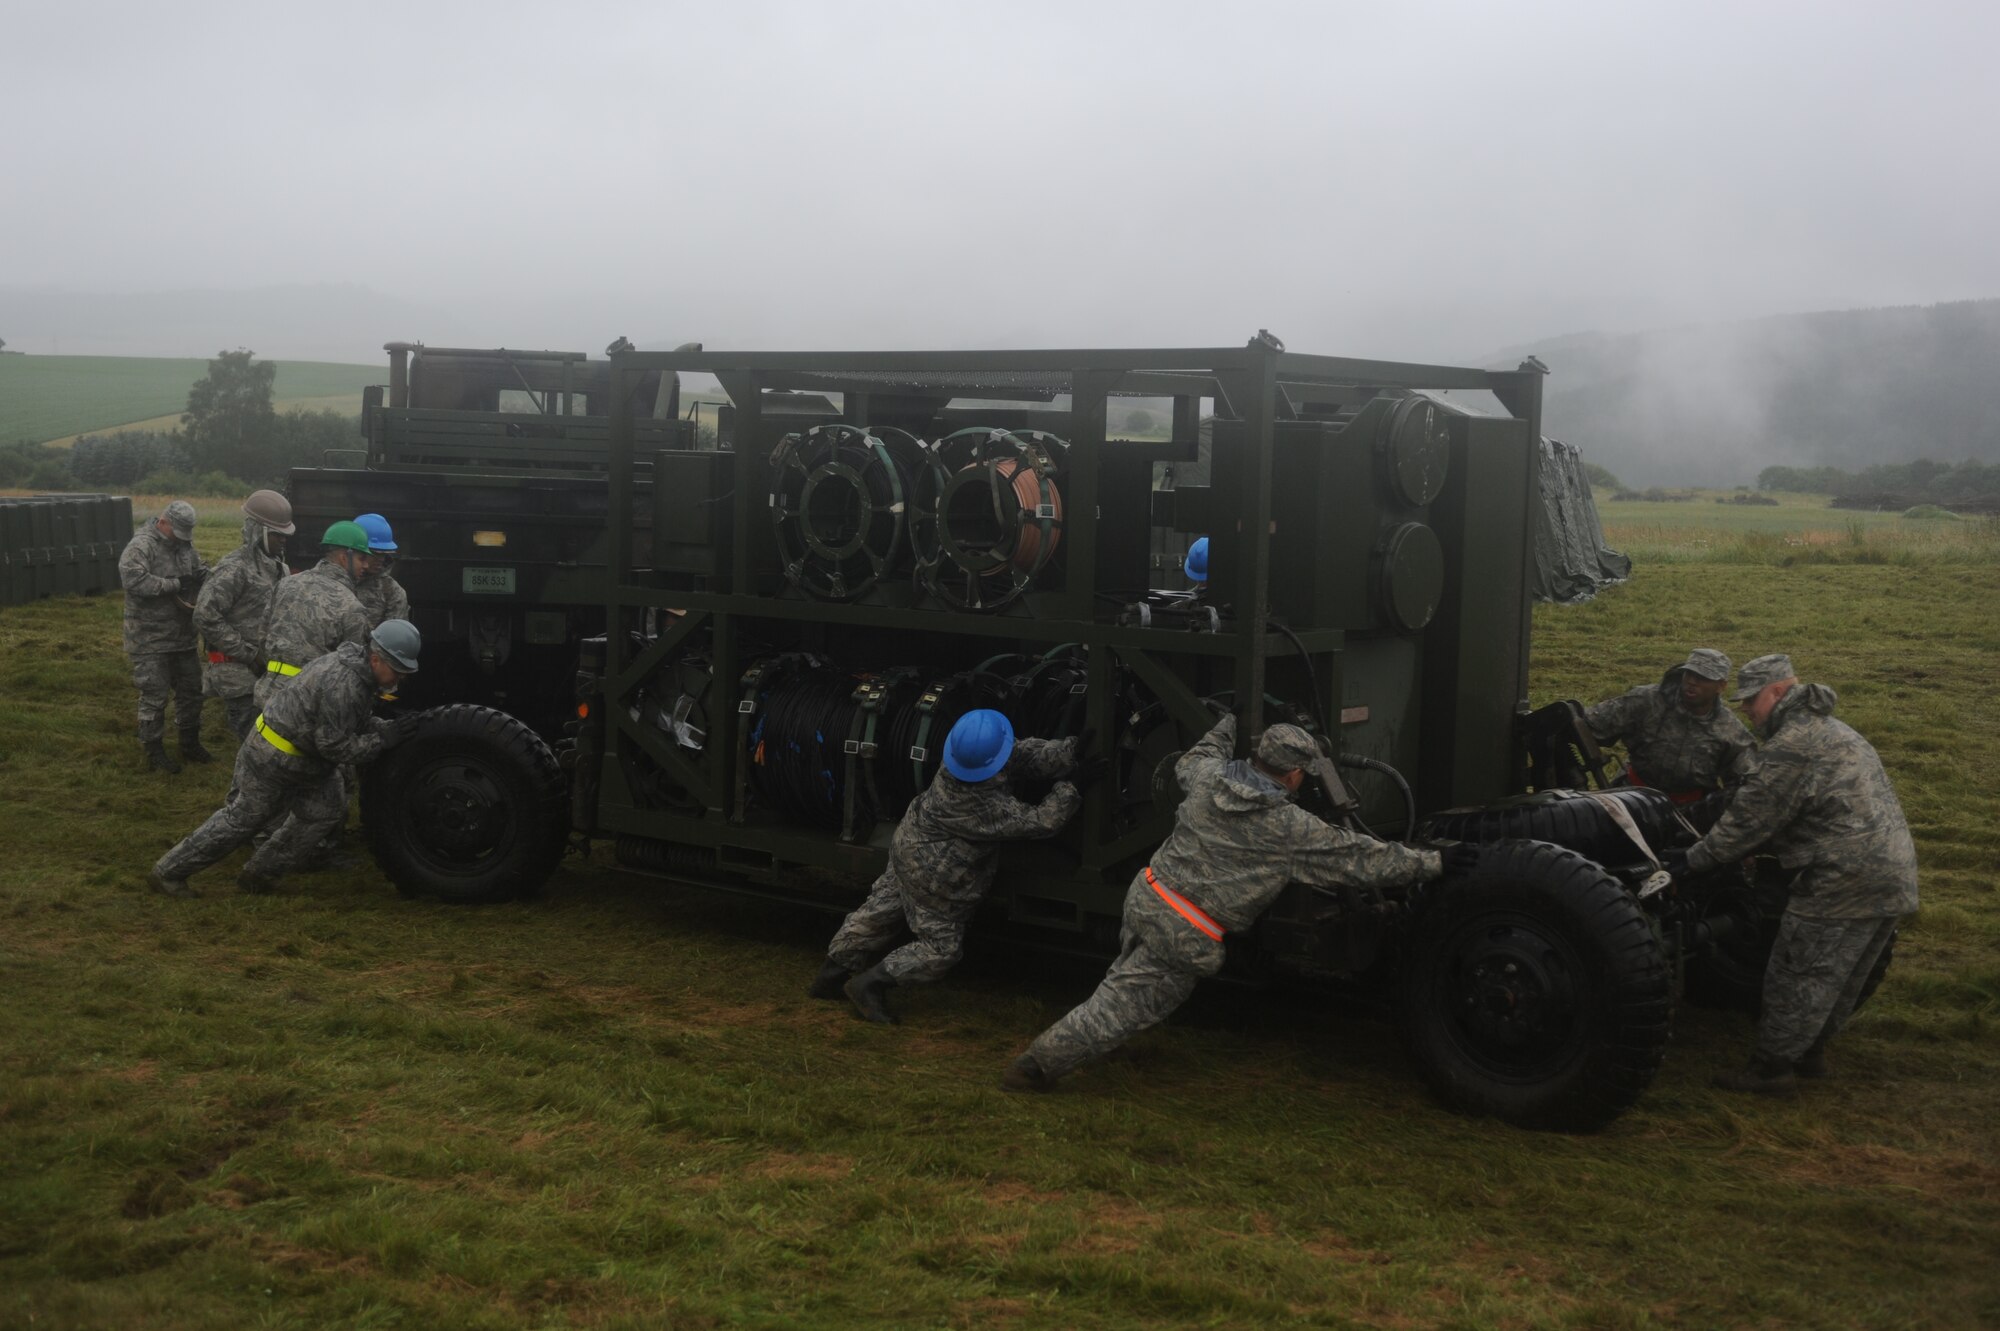 GEROLSTEIN, Germany – Airmen from the 606th Air Control Squadron push pallet of cables through the mud to their training site for Eifel Strike 2012 July 12 here. Eifel Strike is an annual field training exercise in which Airmen build a controlled radar site, and a control and reporting center to work and live from for a week. Exercises like this help Spangdahlem Airmen prepare for contingency operations around the world. It also designed to give them the practice, skills and experience they need to deploy efficiently and effectively within a moment’s notice. (U.S. Air Force photo by Senior Airman Natasha Stannard/Released)